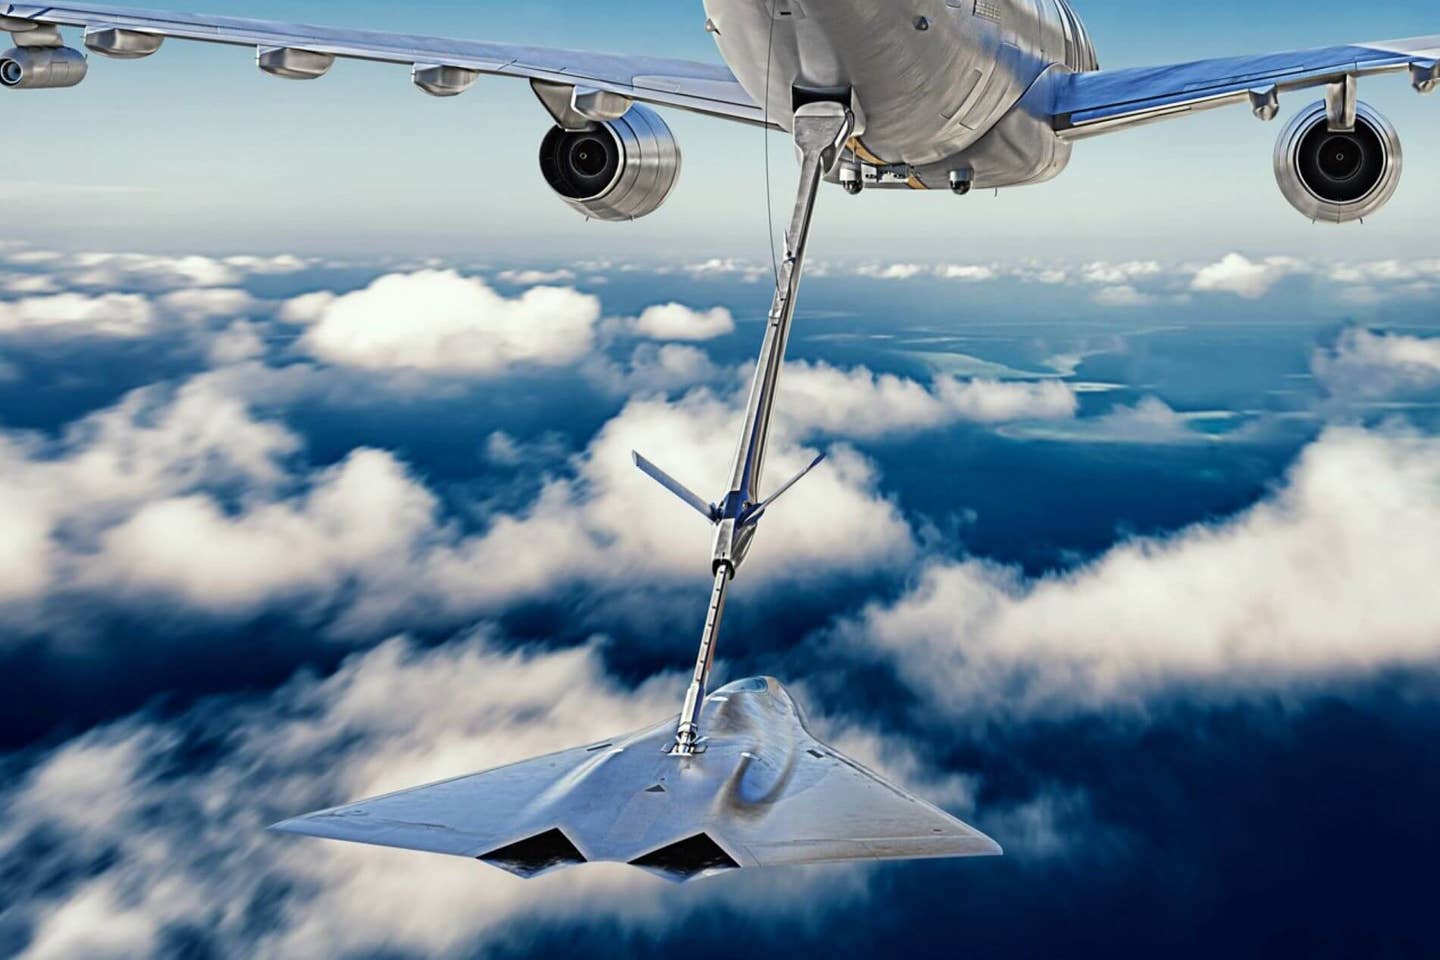 Depiction of an NGAD-like manned tactical jet being refueled. (Lockheed Martin)